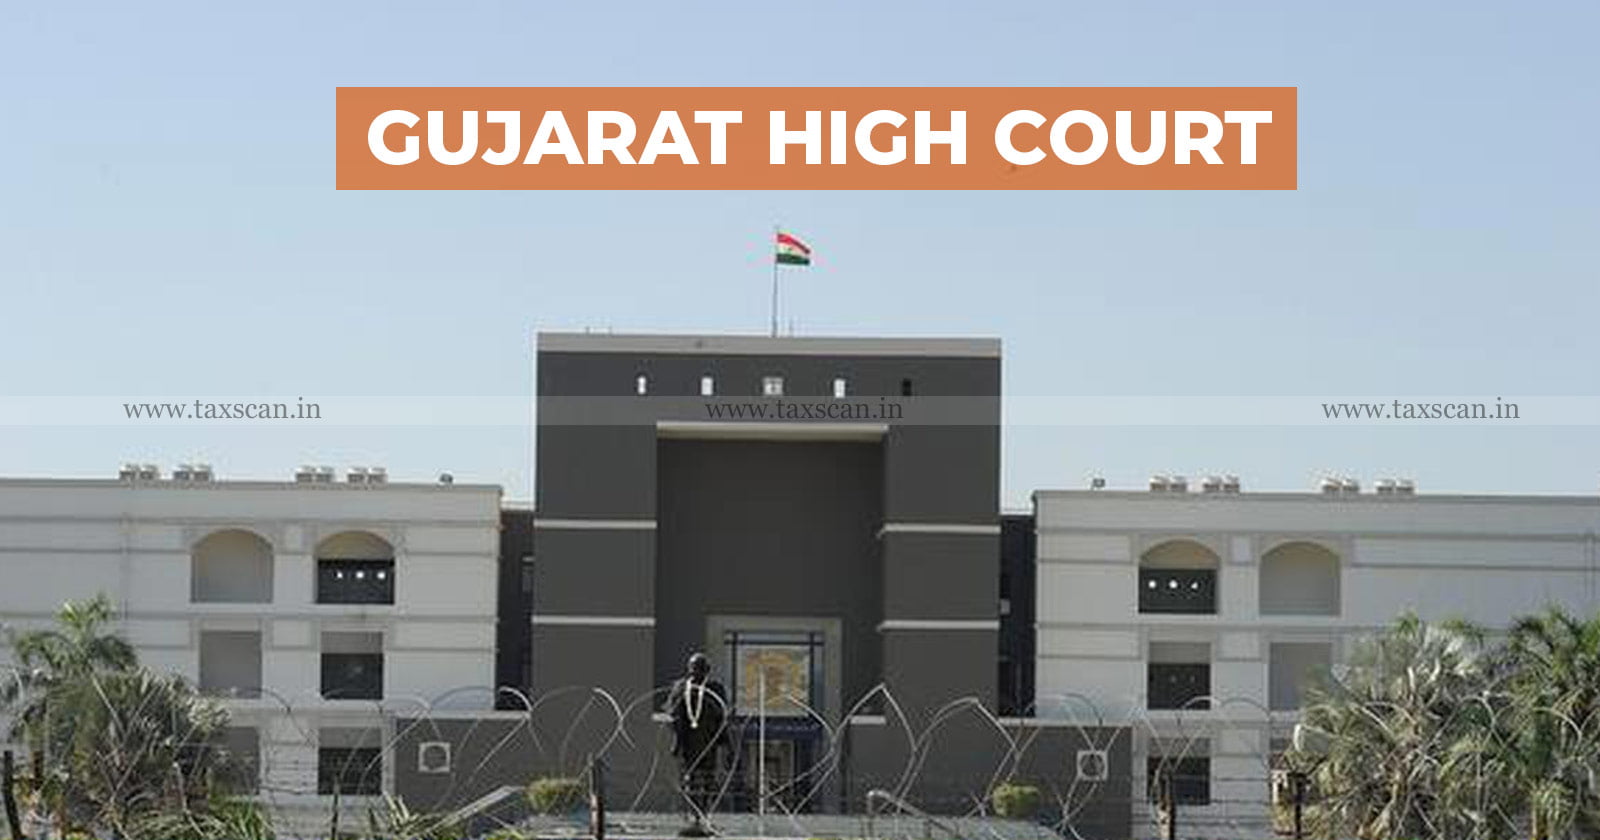 Reassessment - powers - could - not - be - exercised - for - the - purpose - of - Re - verification - Gujarat - High - Court - TAXSCAN